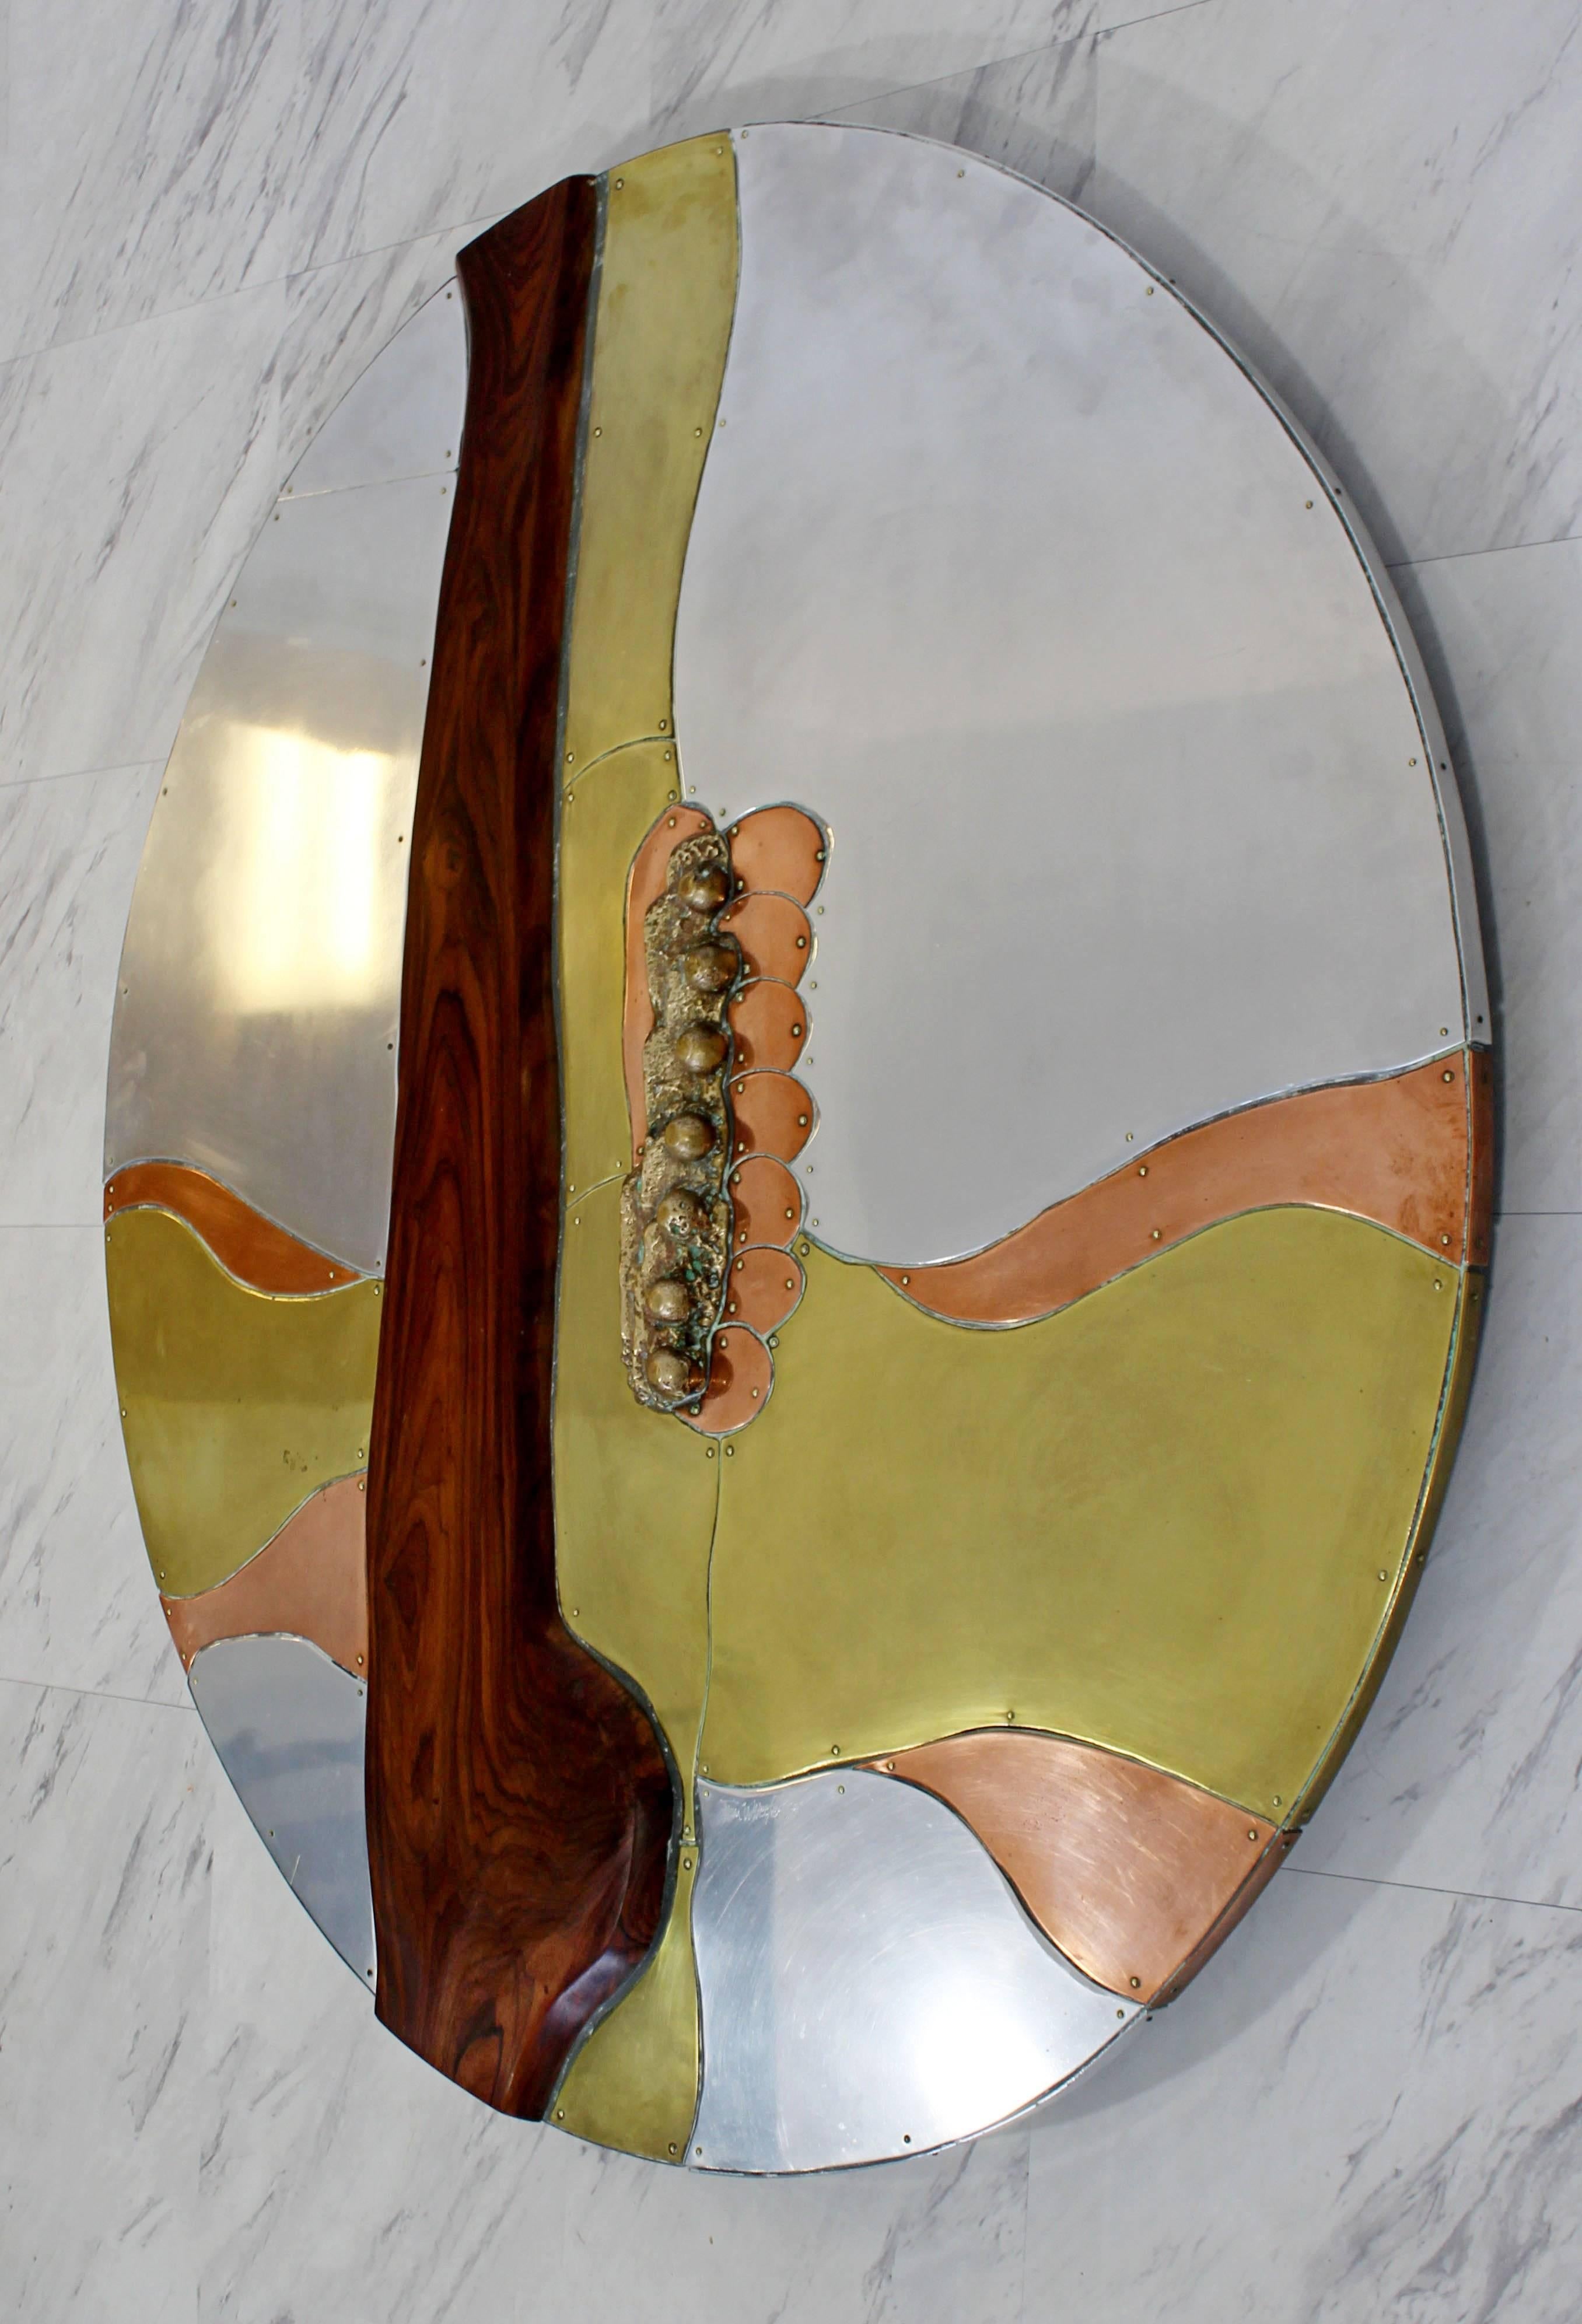 For your consideration is a phenomenal wall art sculpture, made of brass, copper, aluminium, signed and dated by Thom Wheeler, 1978. In excellent condition. The dimensions are 36